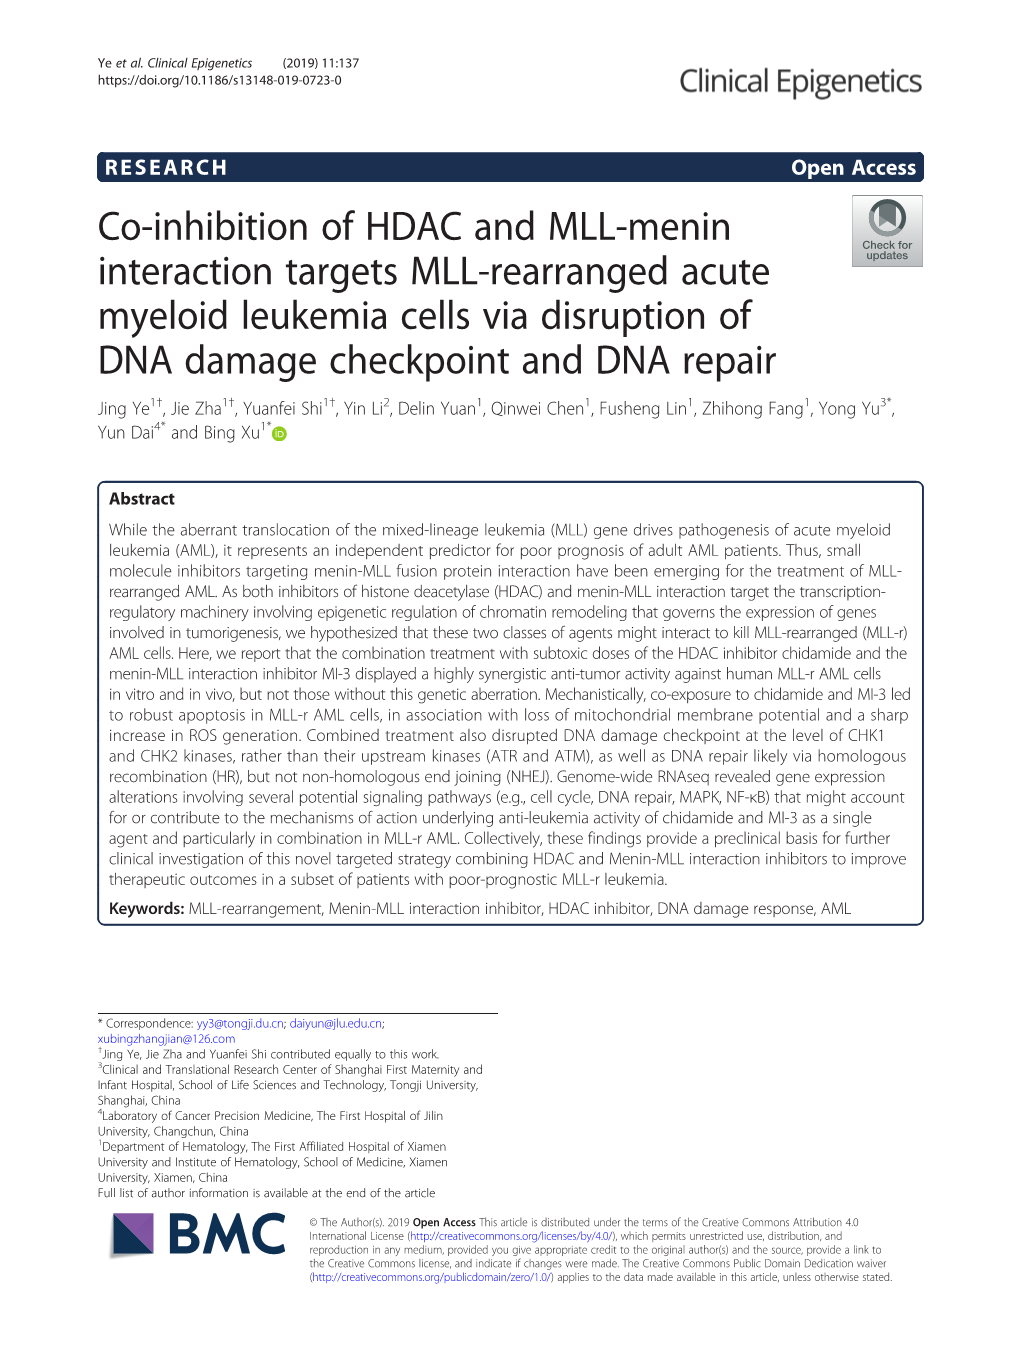 Co-Inhibition of HDAC and MLL-Menin Interaction Targets MLL